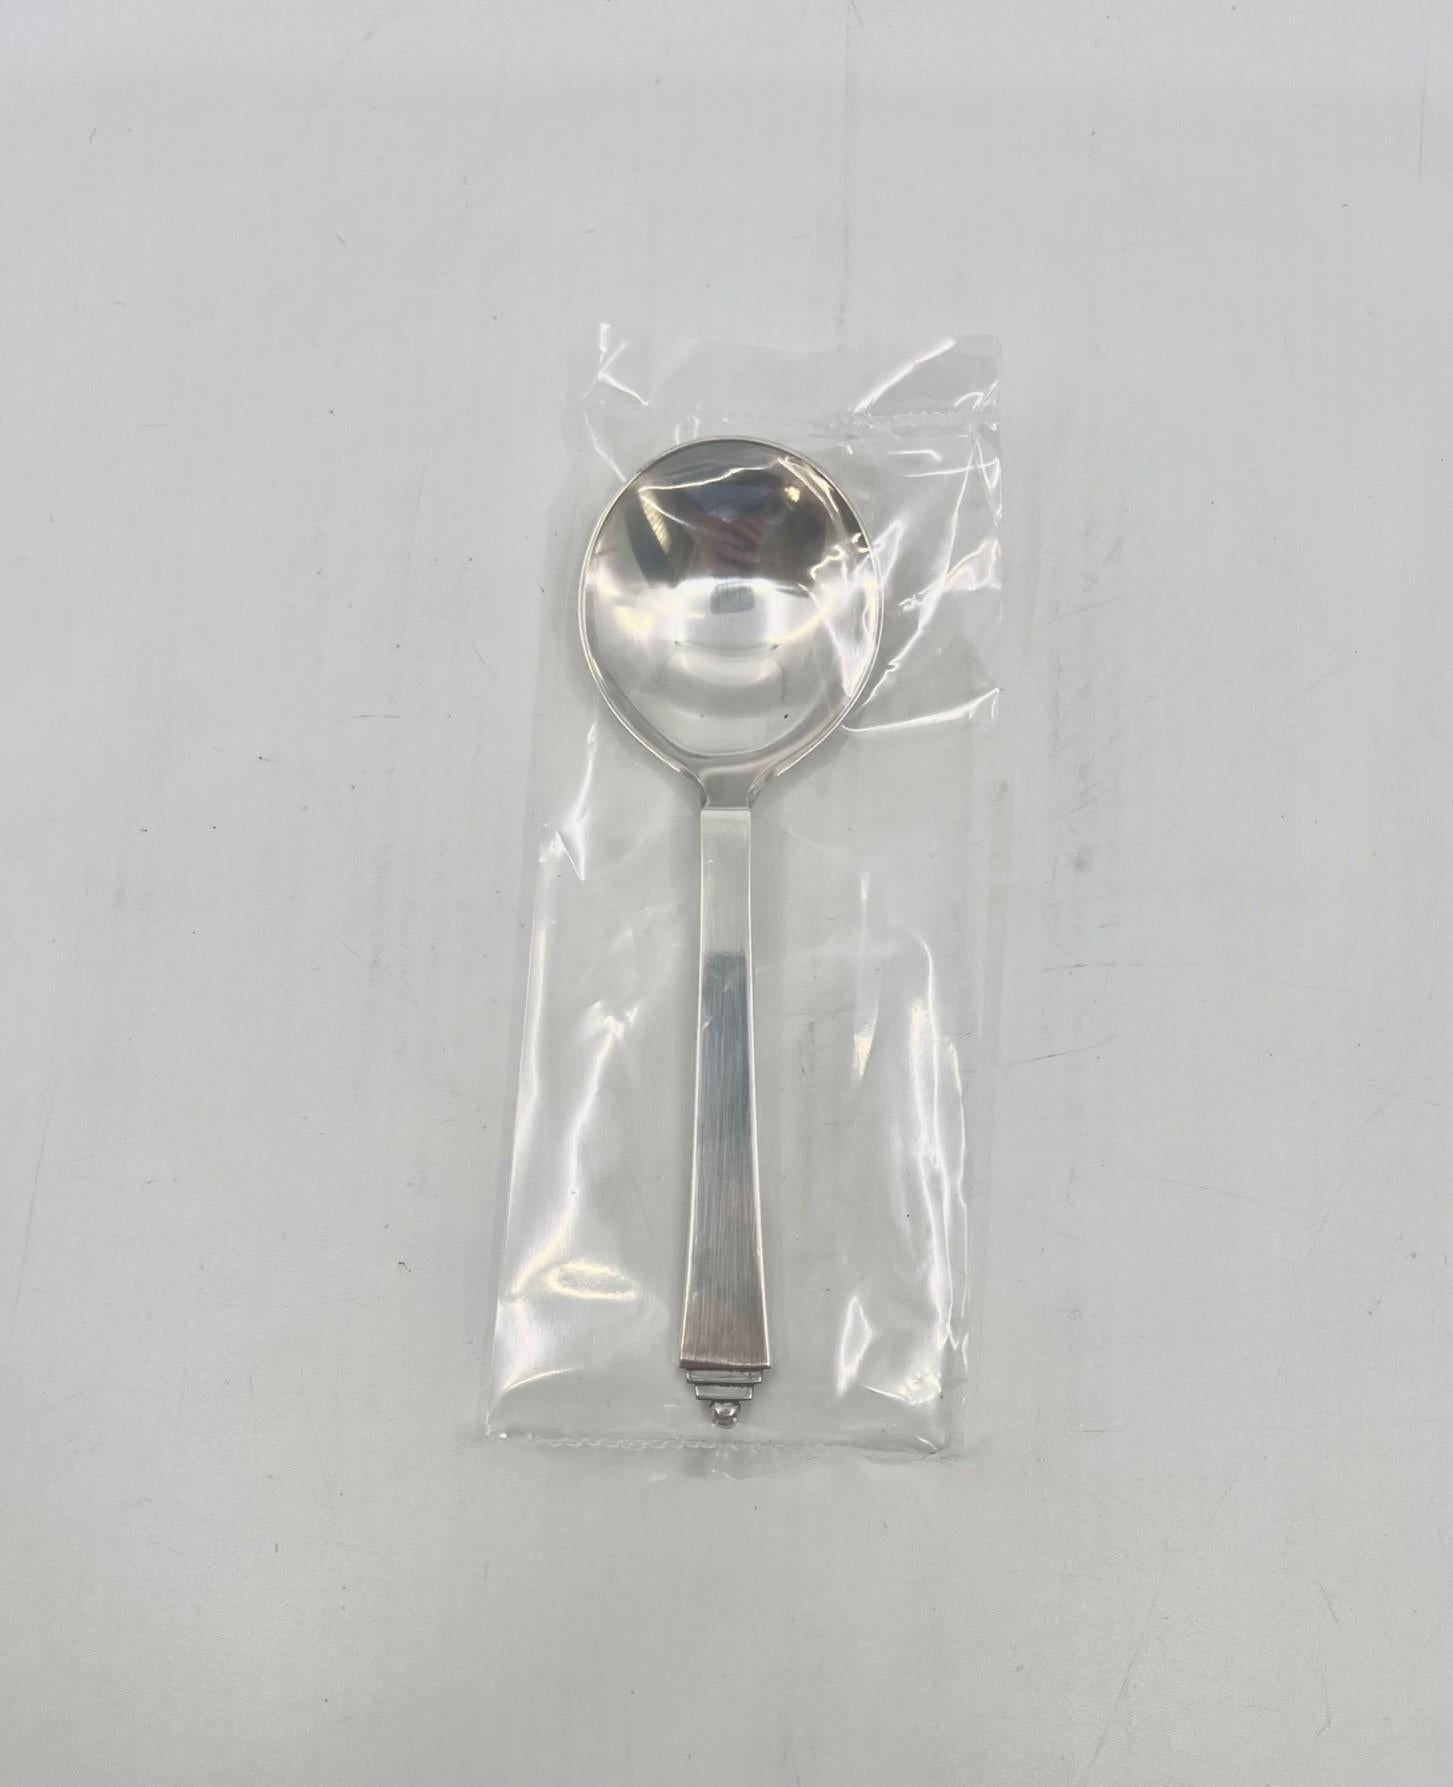 A sterling silver Georg Jensen round soup spoon, item #051 in the Pyramid pattern, design #15 by Harald Nielsen from 1926. These spoons are no longer produced.

Additional information:
Material: Sterling silver
Styles: Art Deco
Hallmarks: With Georg